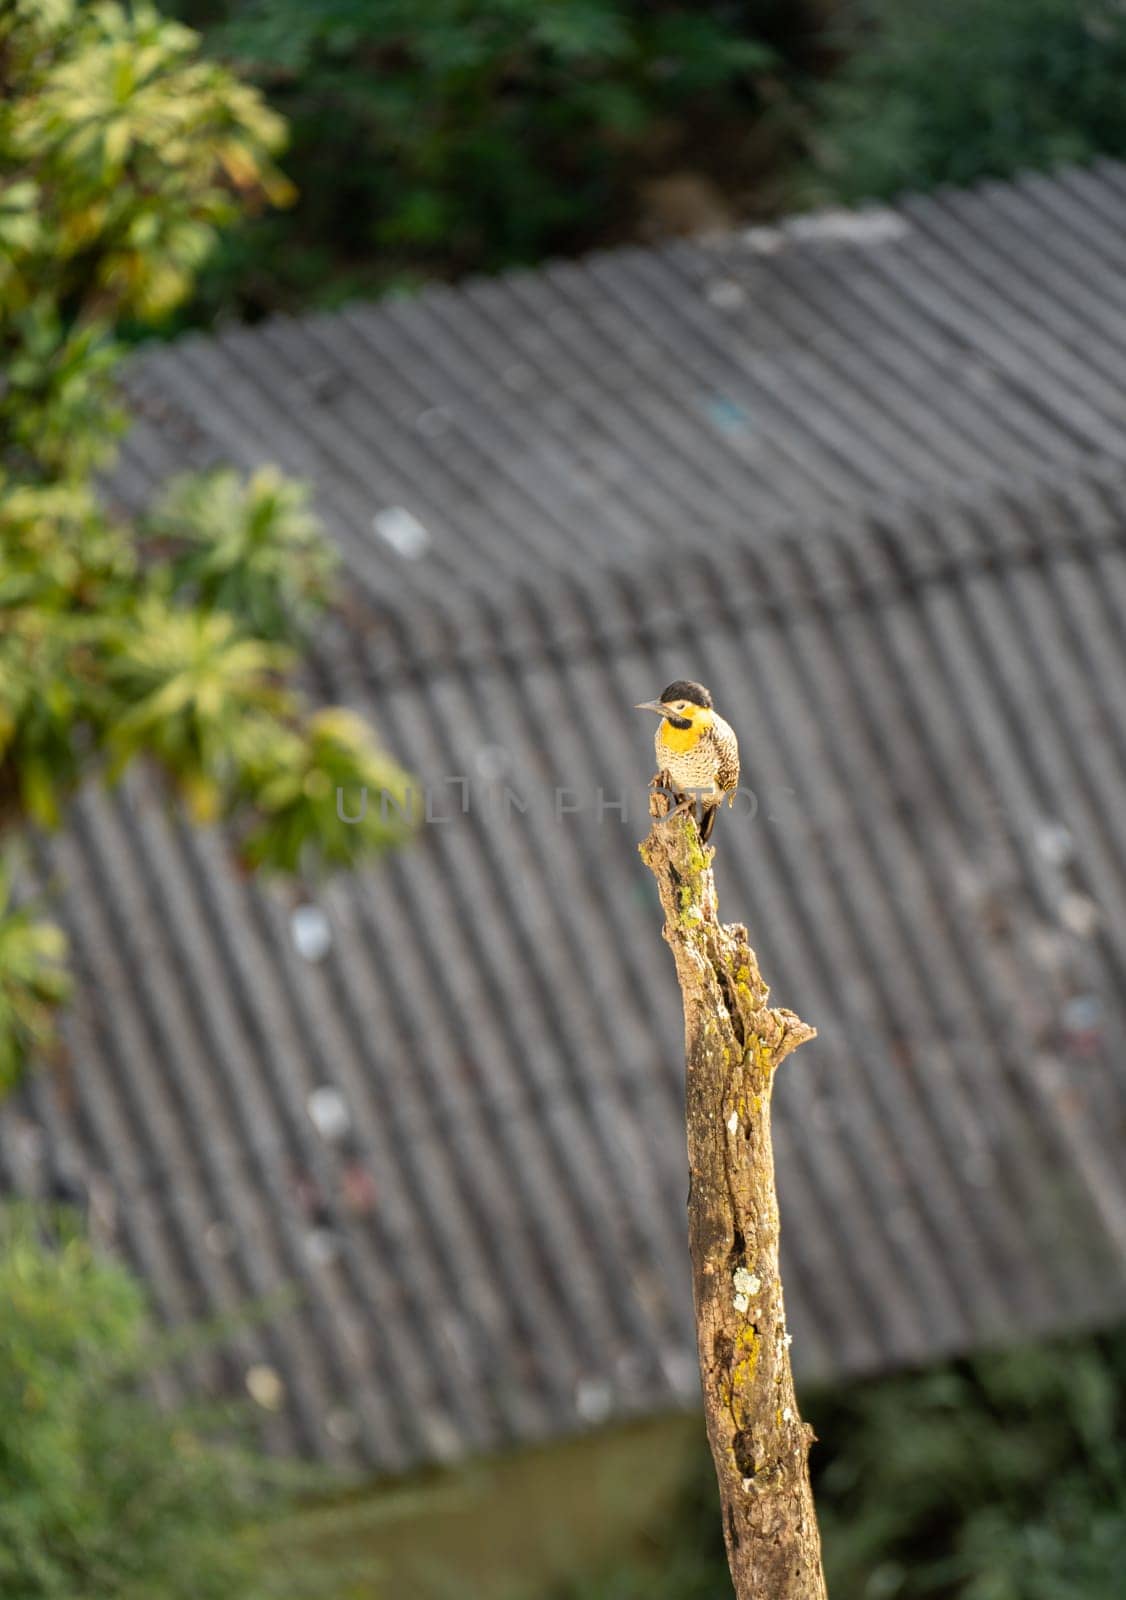 Yellow and Black Woodpecker on a Dry Tree Trunk in Urban Surroundings by FerradalFCG